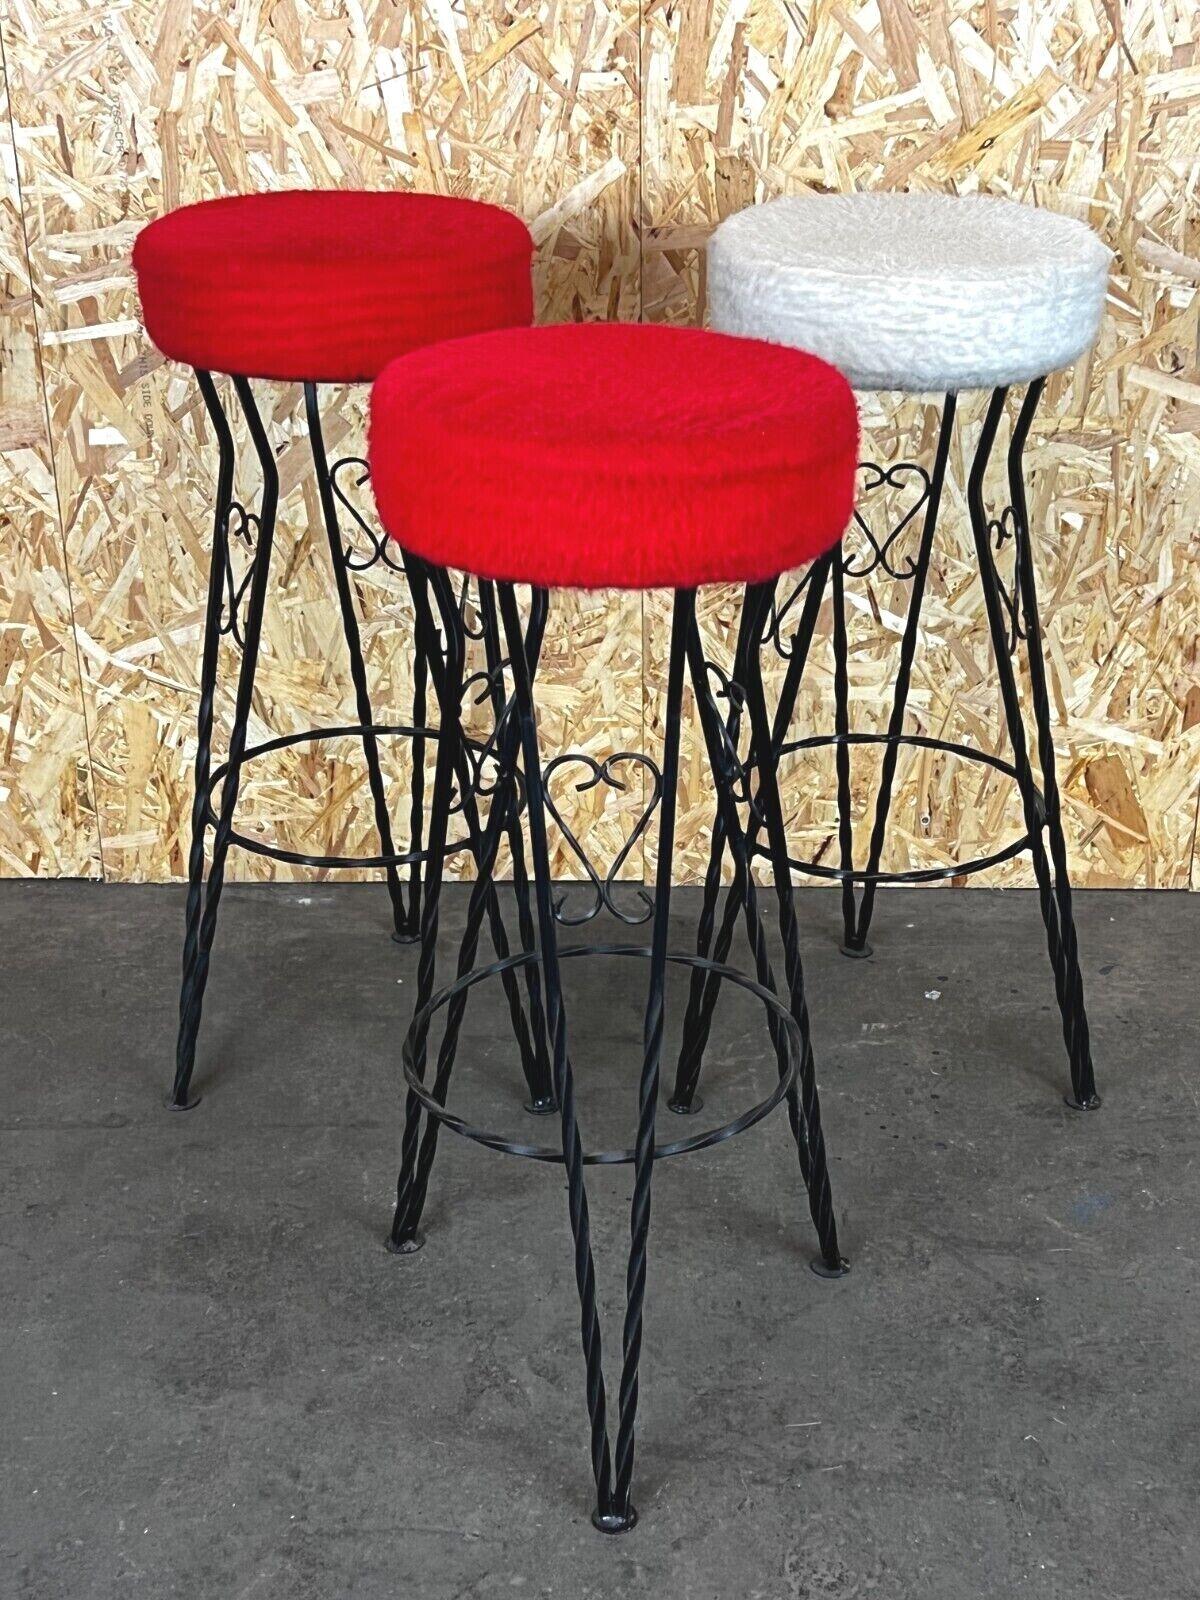 3x 50s 60s bar stools brutalist iron cast iron design 50s 60s

Object: 3x bar stools

Manufacturer:

Condition: good - vintage

Age: around 1950-1960

Dimensions:

42cm x 42cm x 83cm
Seat height = 83cm

Other notes:

The pictures